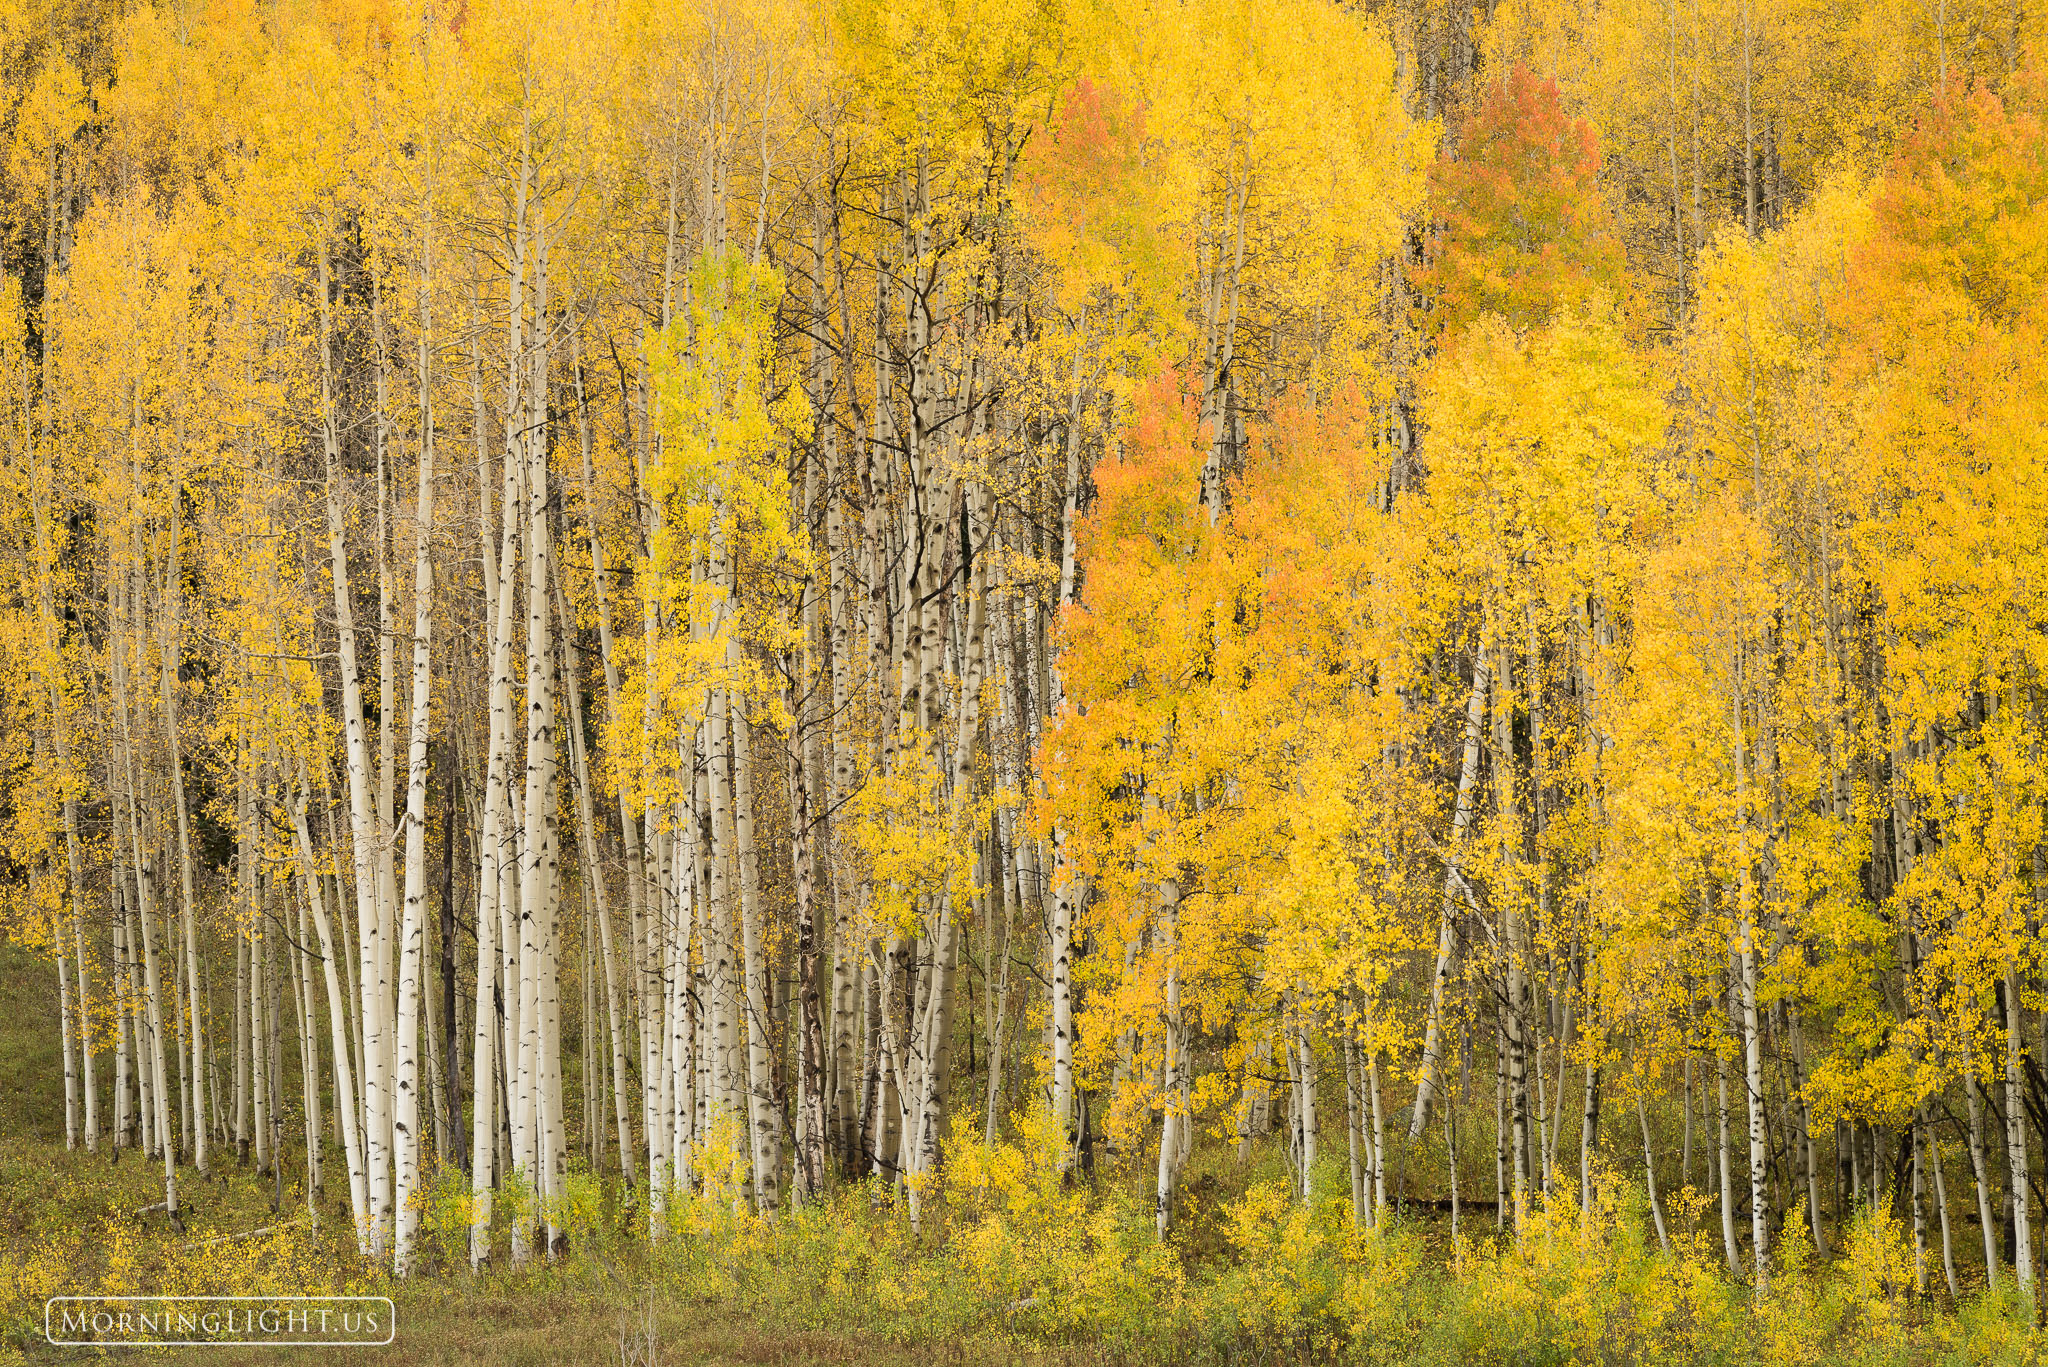 A vibrant stand of aspen glow in their autumn colors near Kebler Pass, CO.